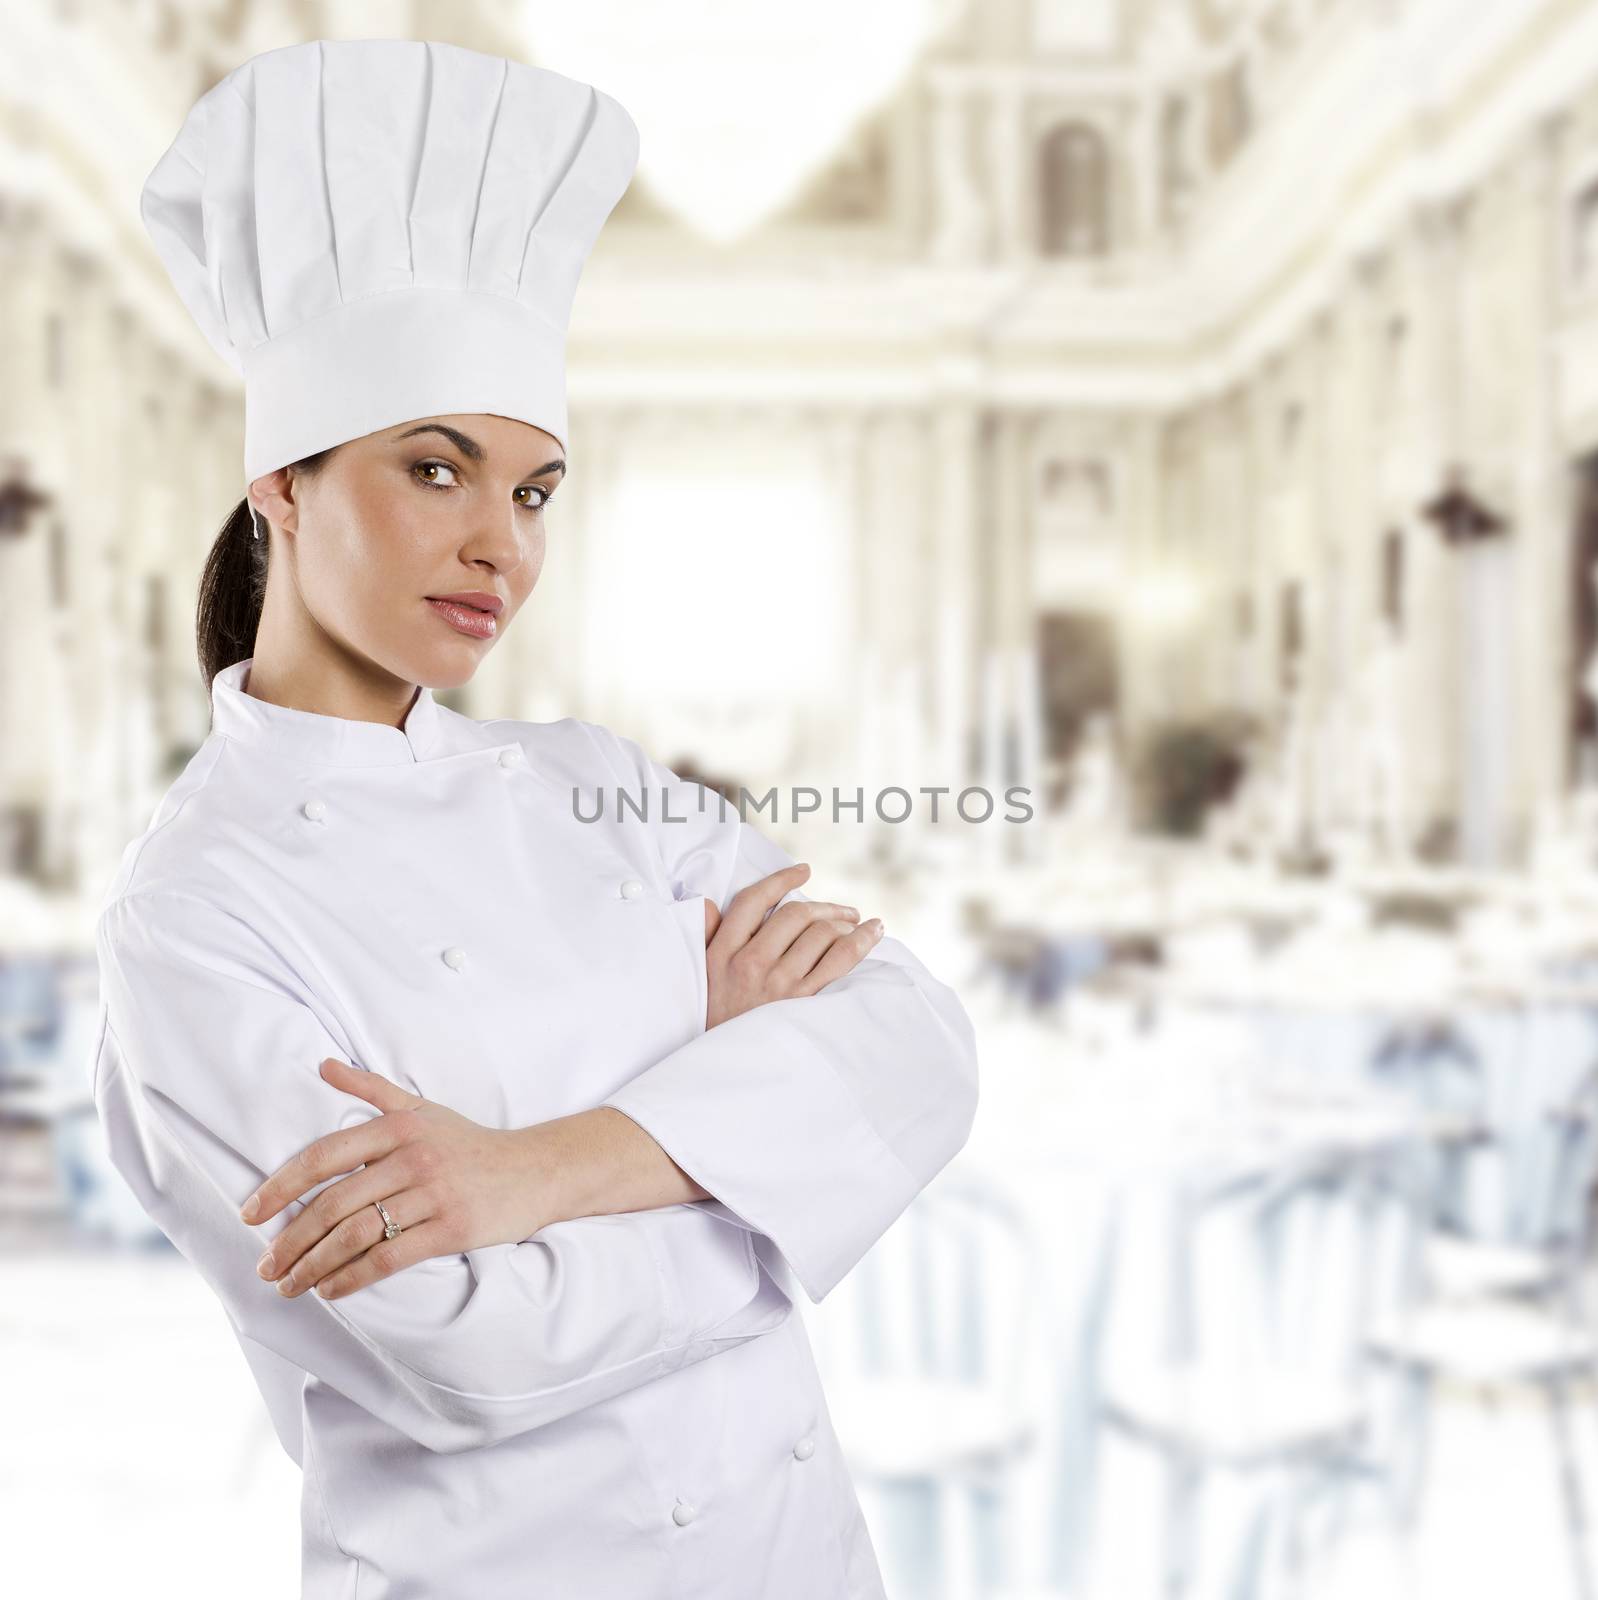 the chef by fotoCD